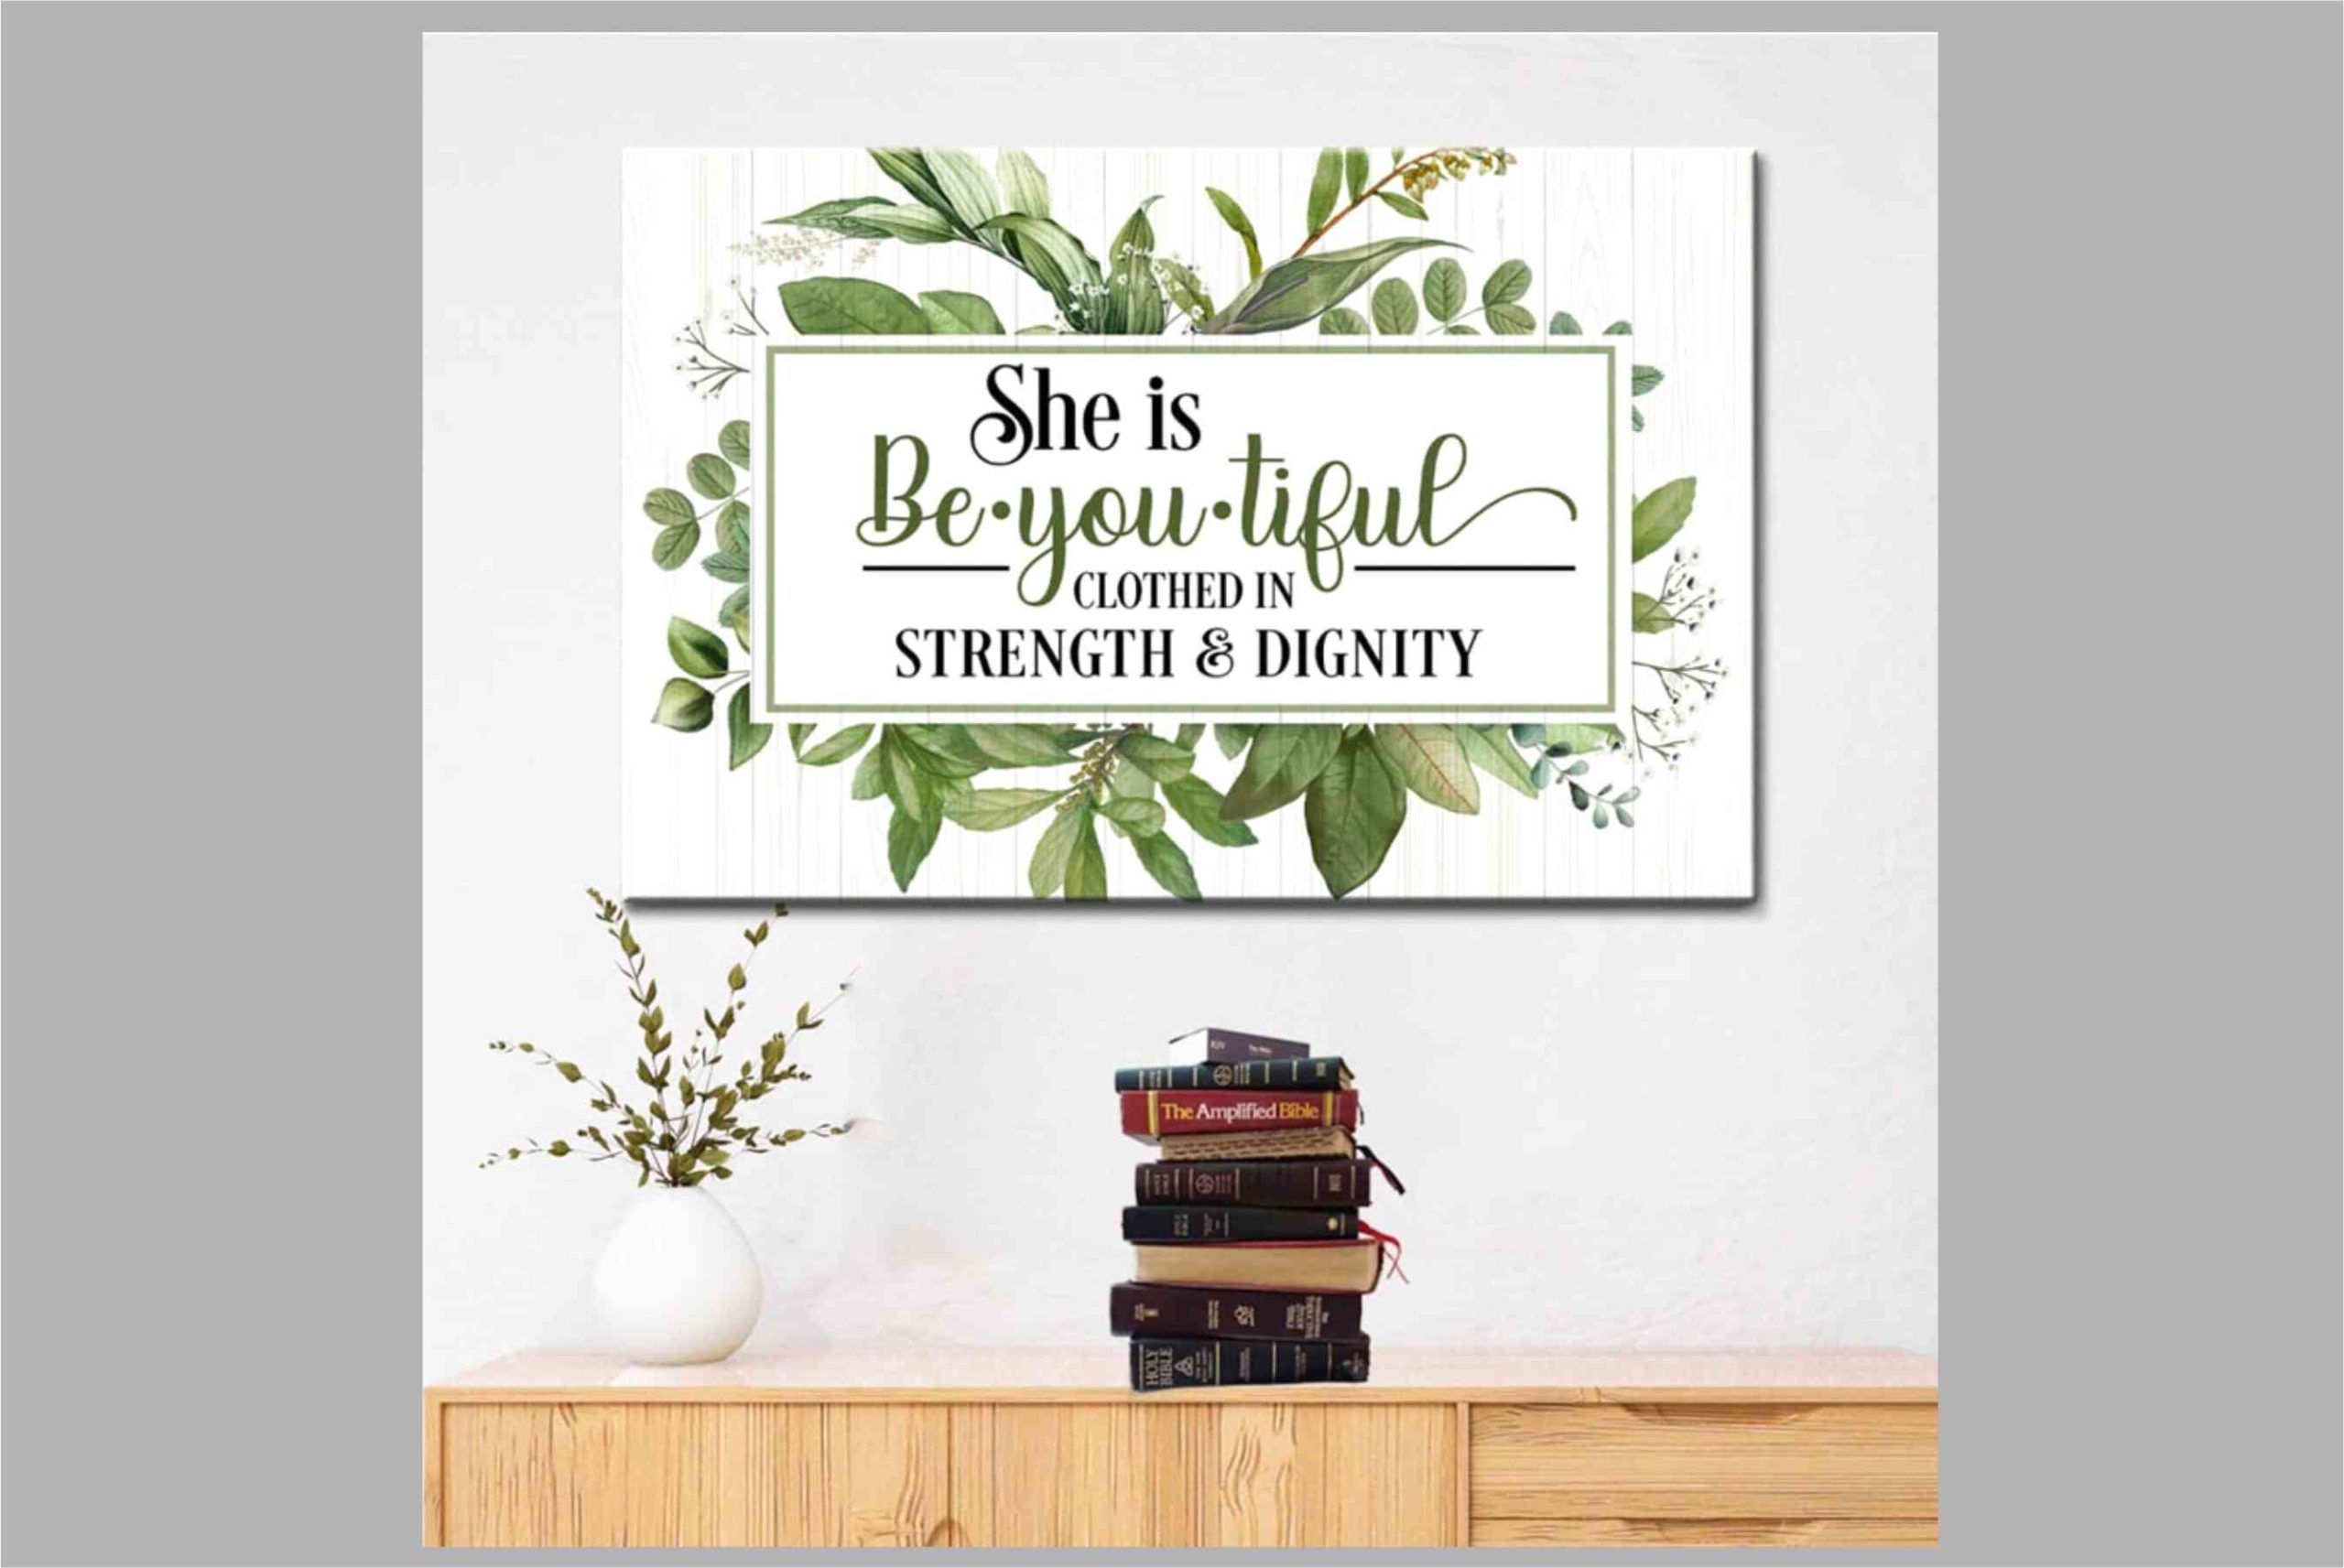 She Is Beyoutiful Clothed In Strength & Dignity Wall Art